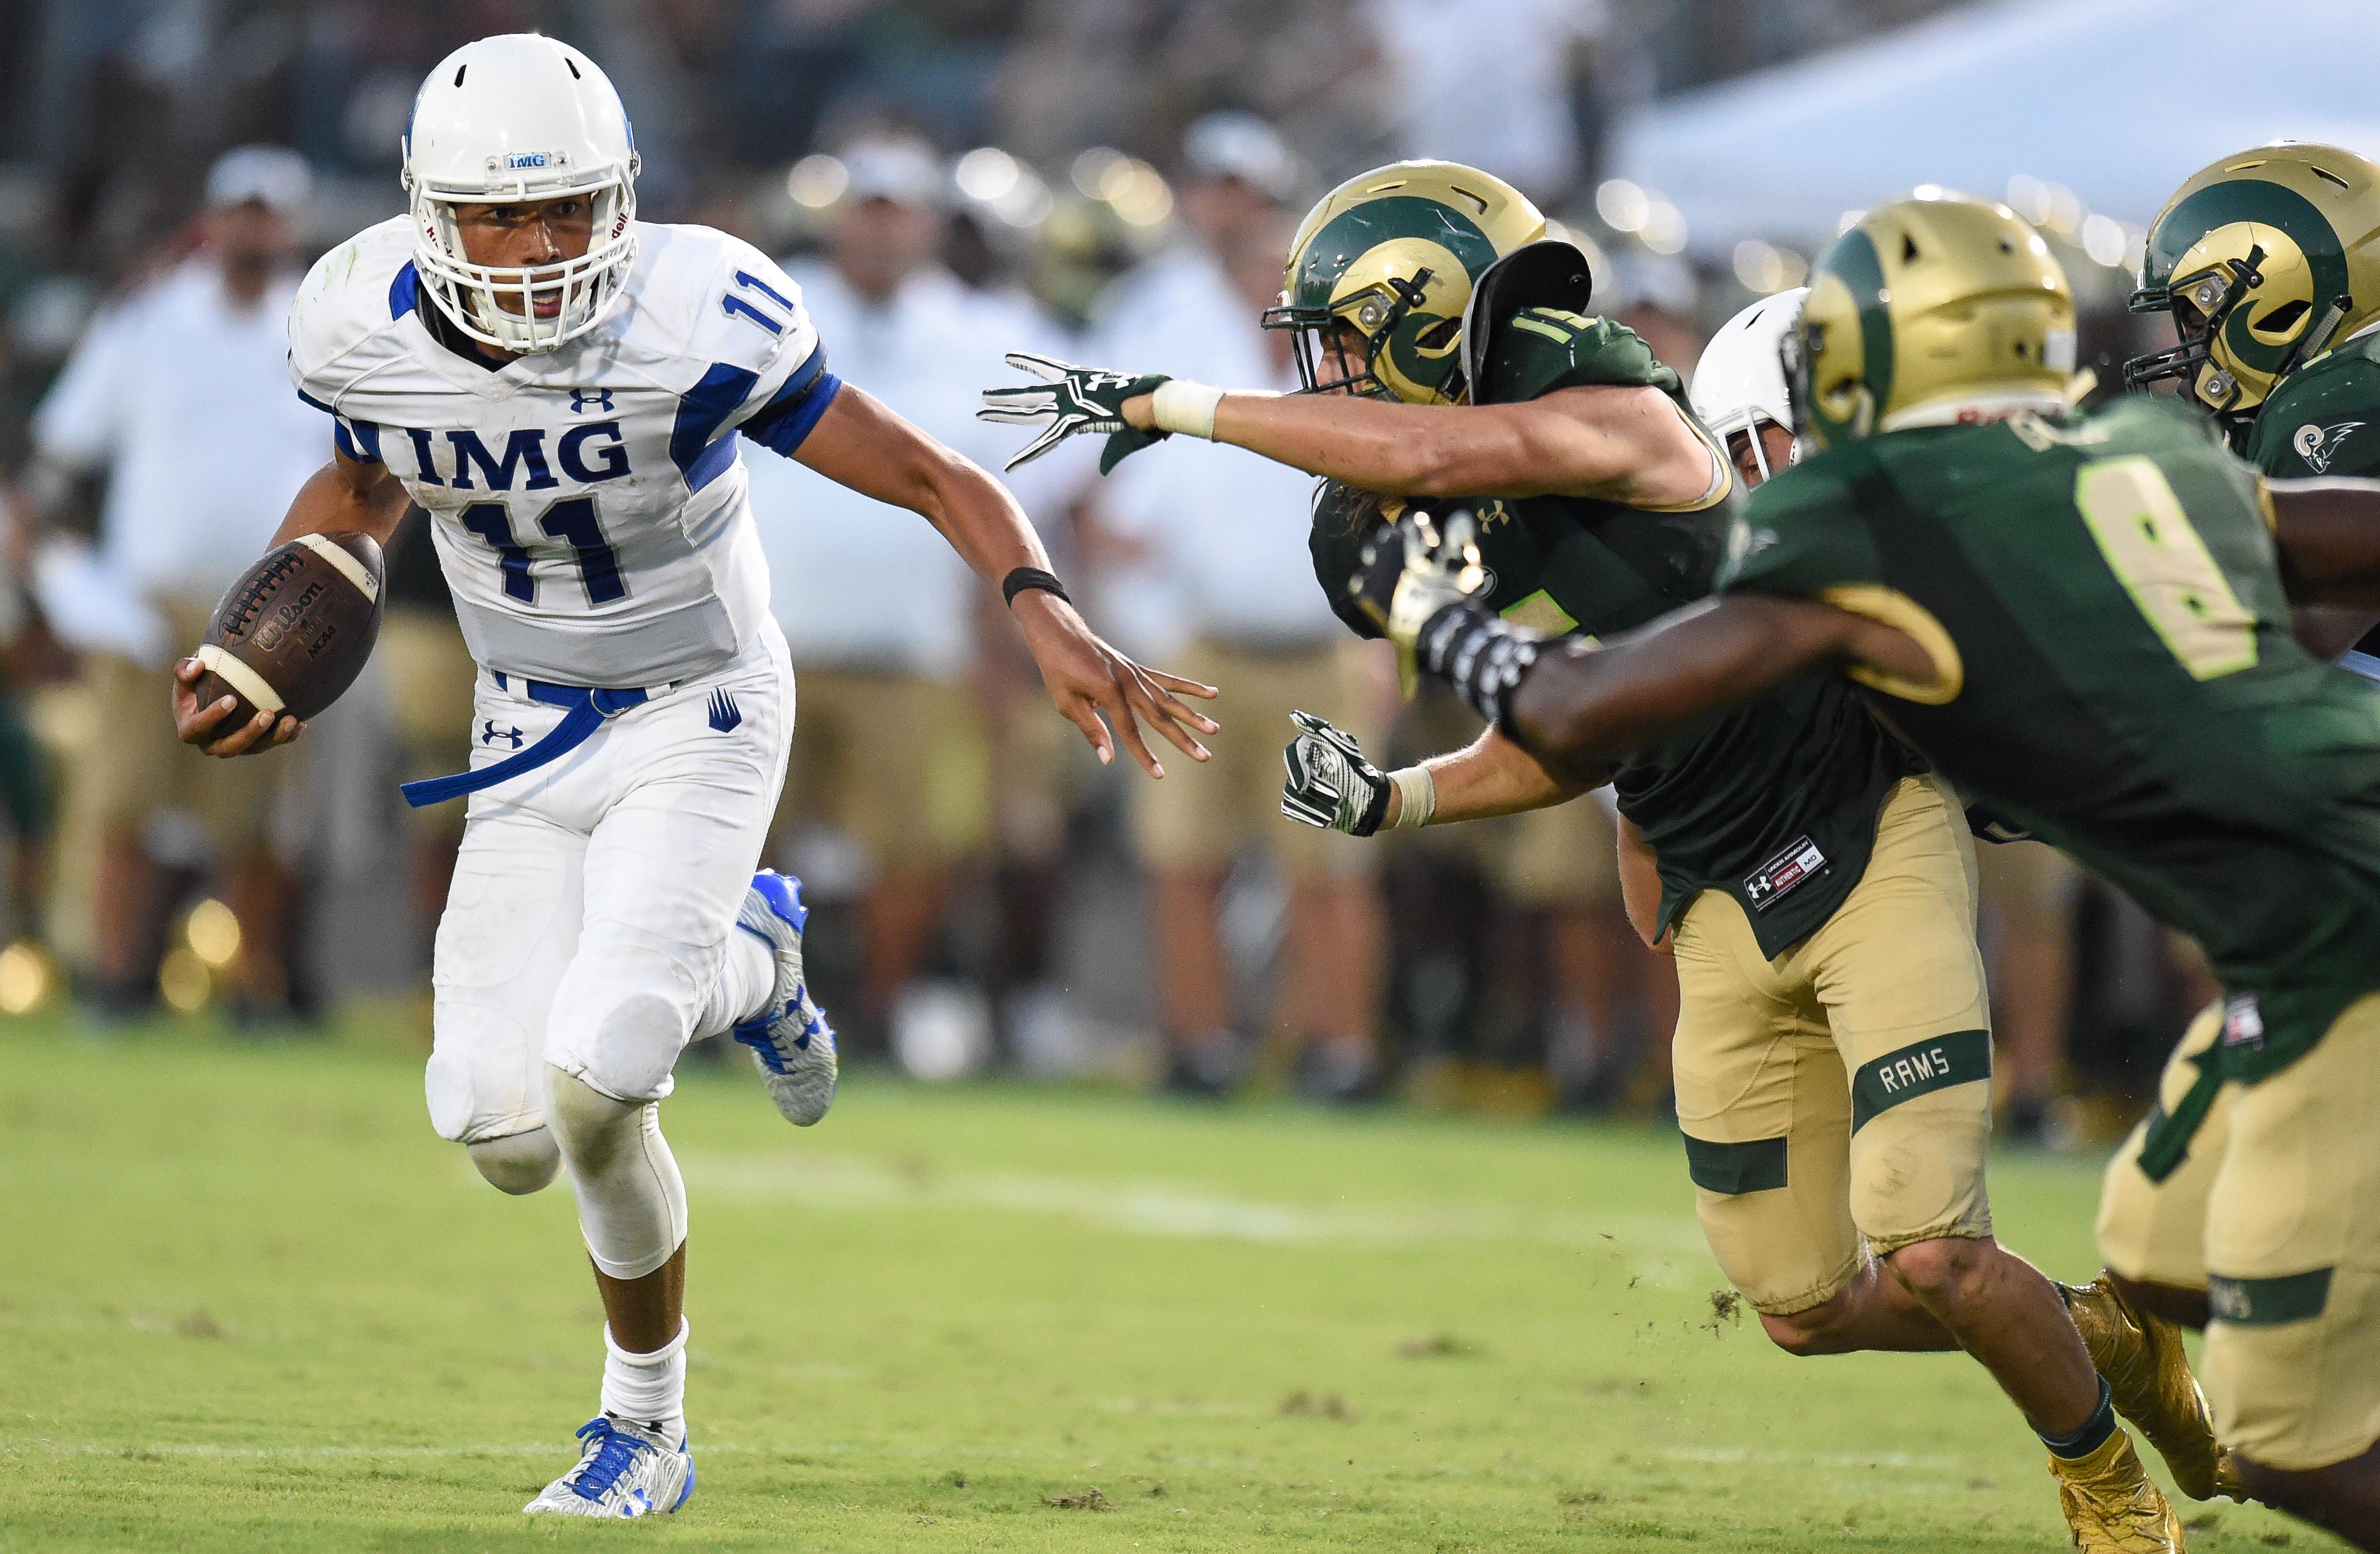 Aug 27, 2016; Loganville, GA, USA; IMG Academy quarterback Kellen Mond (11) runs against the Grayson Rams during the second half in a high school football duel of top ranked teams at Grayson Community Stadium. IMG Academy defeated the Grayson Rams 26-7. Mandatory Credit: Dale Zanine-USA TODAY Sports ORIG FILE ID: 20160827_sal_sz2_193.JPG